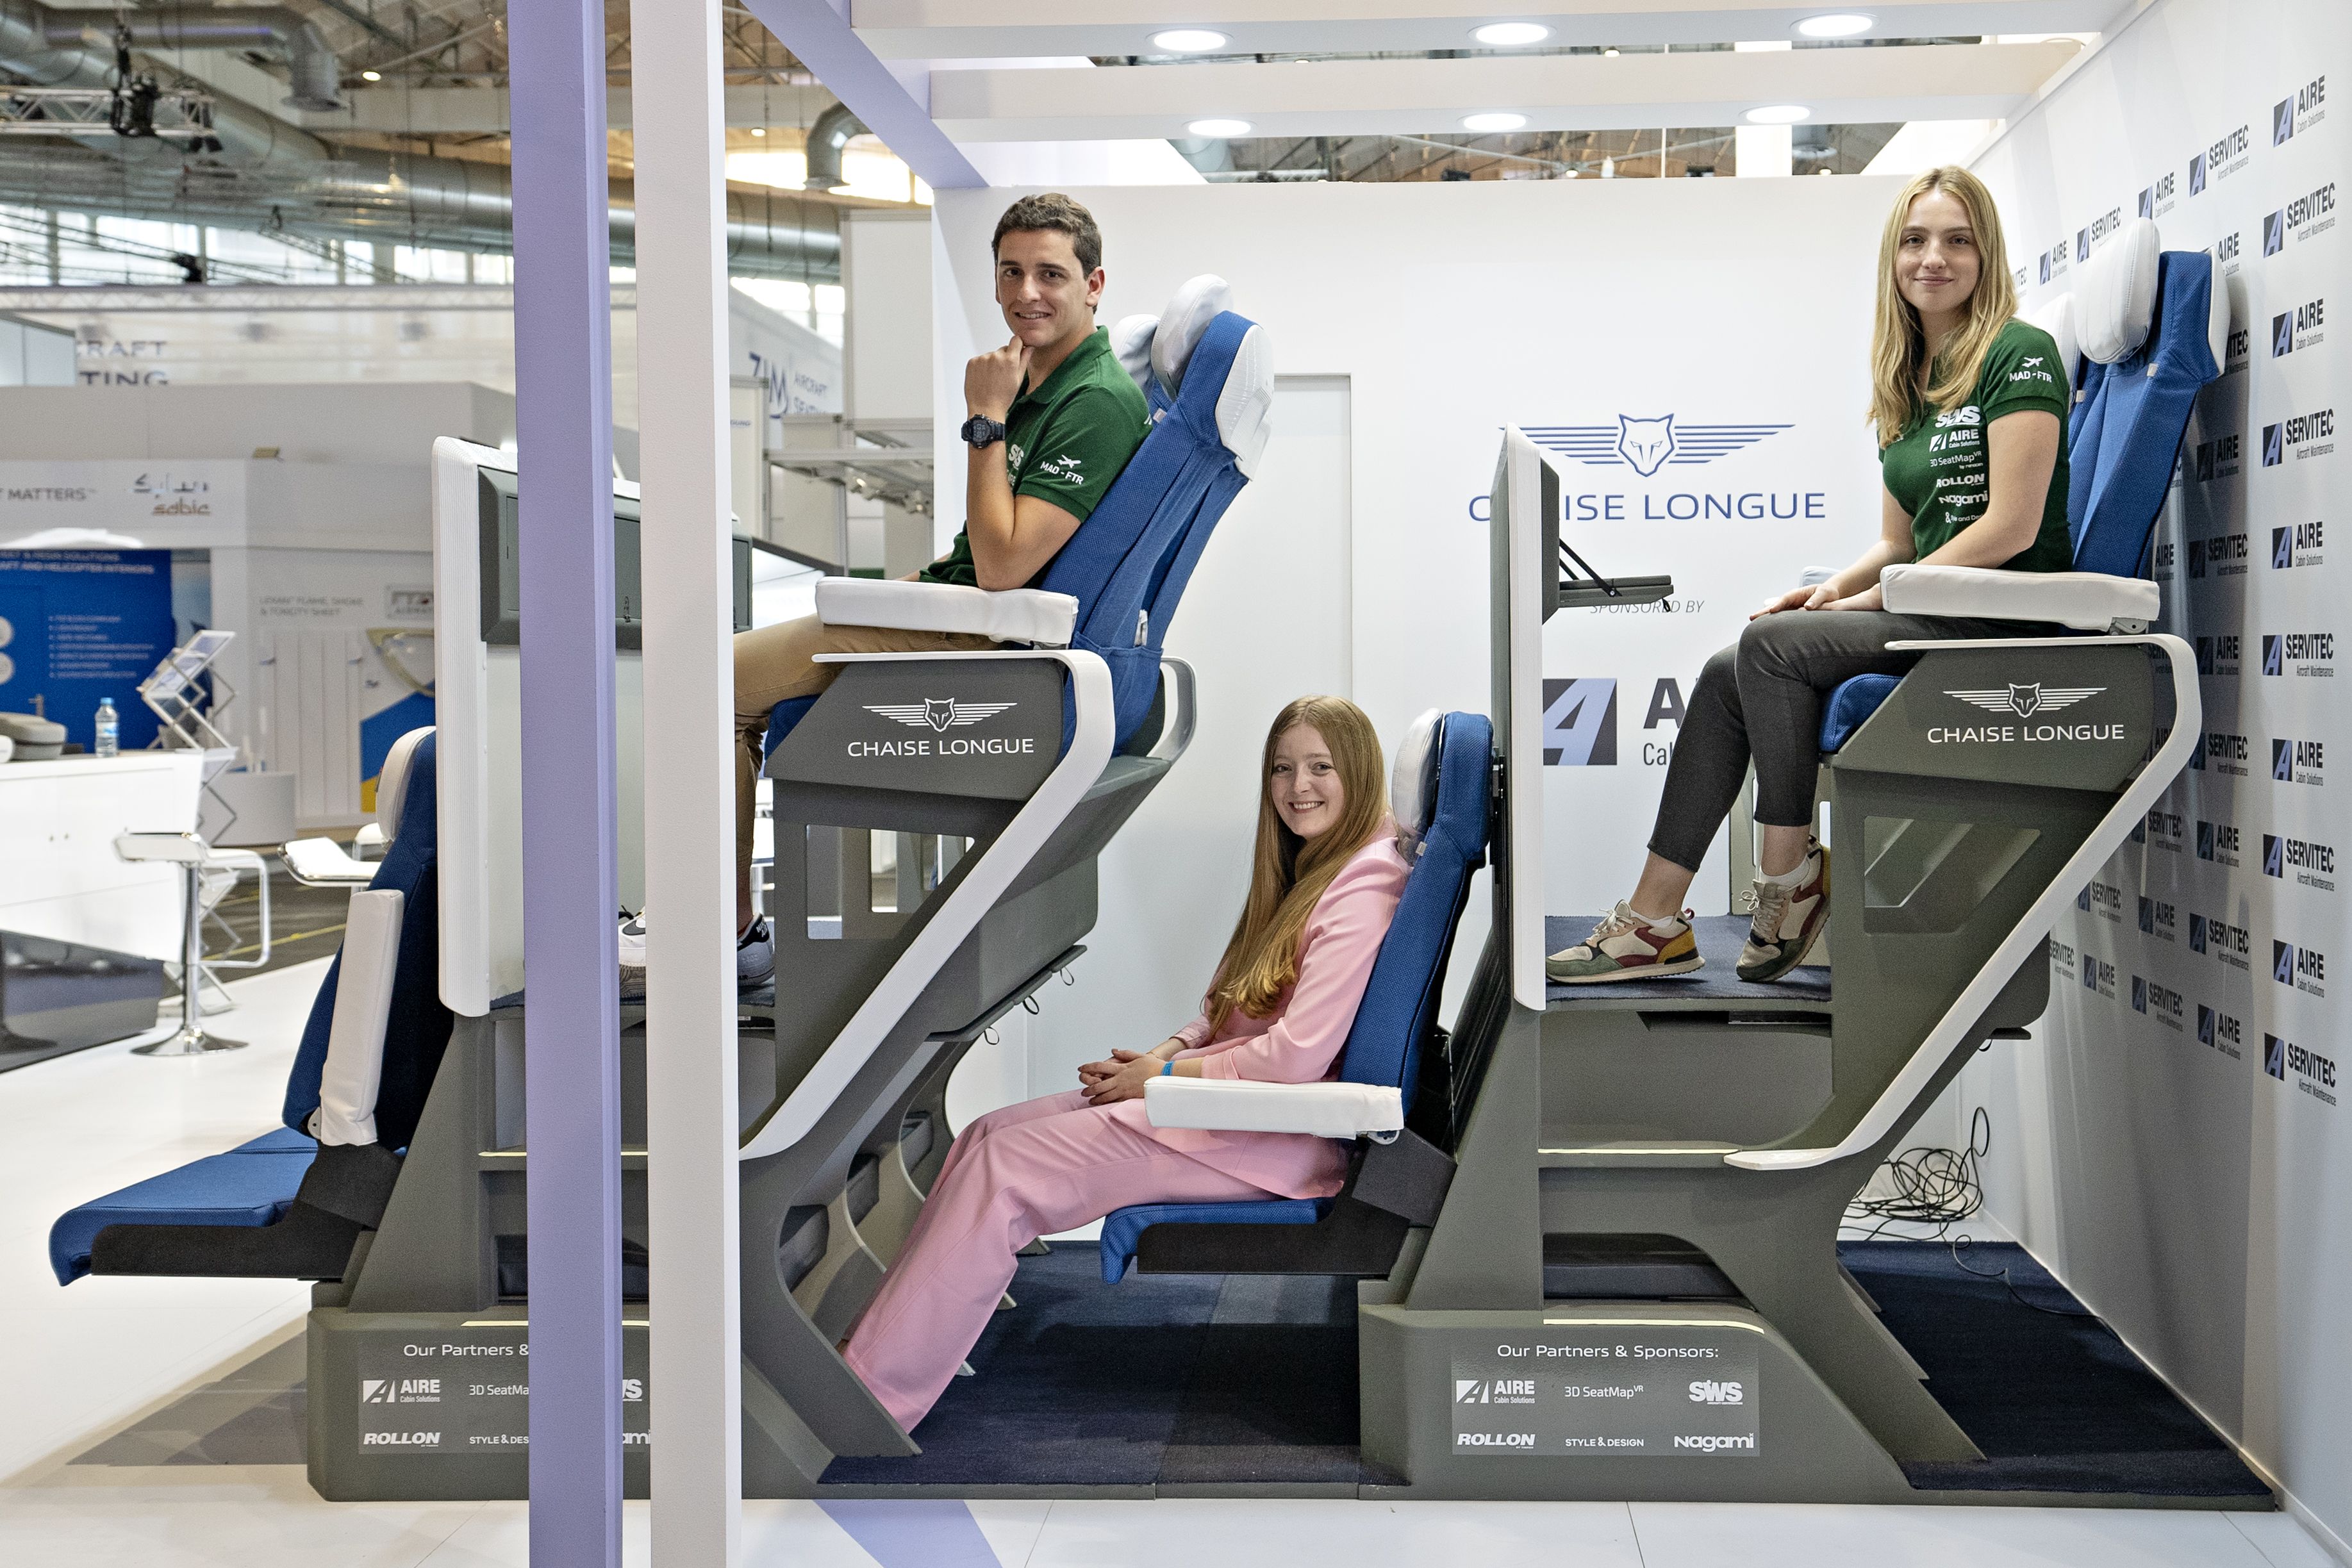 The double-decker airplane seat is back. Here's what it looks like now